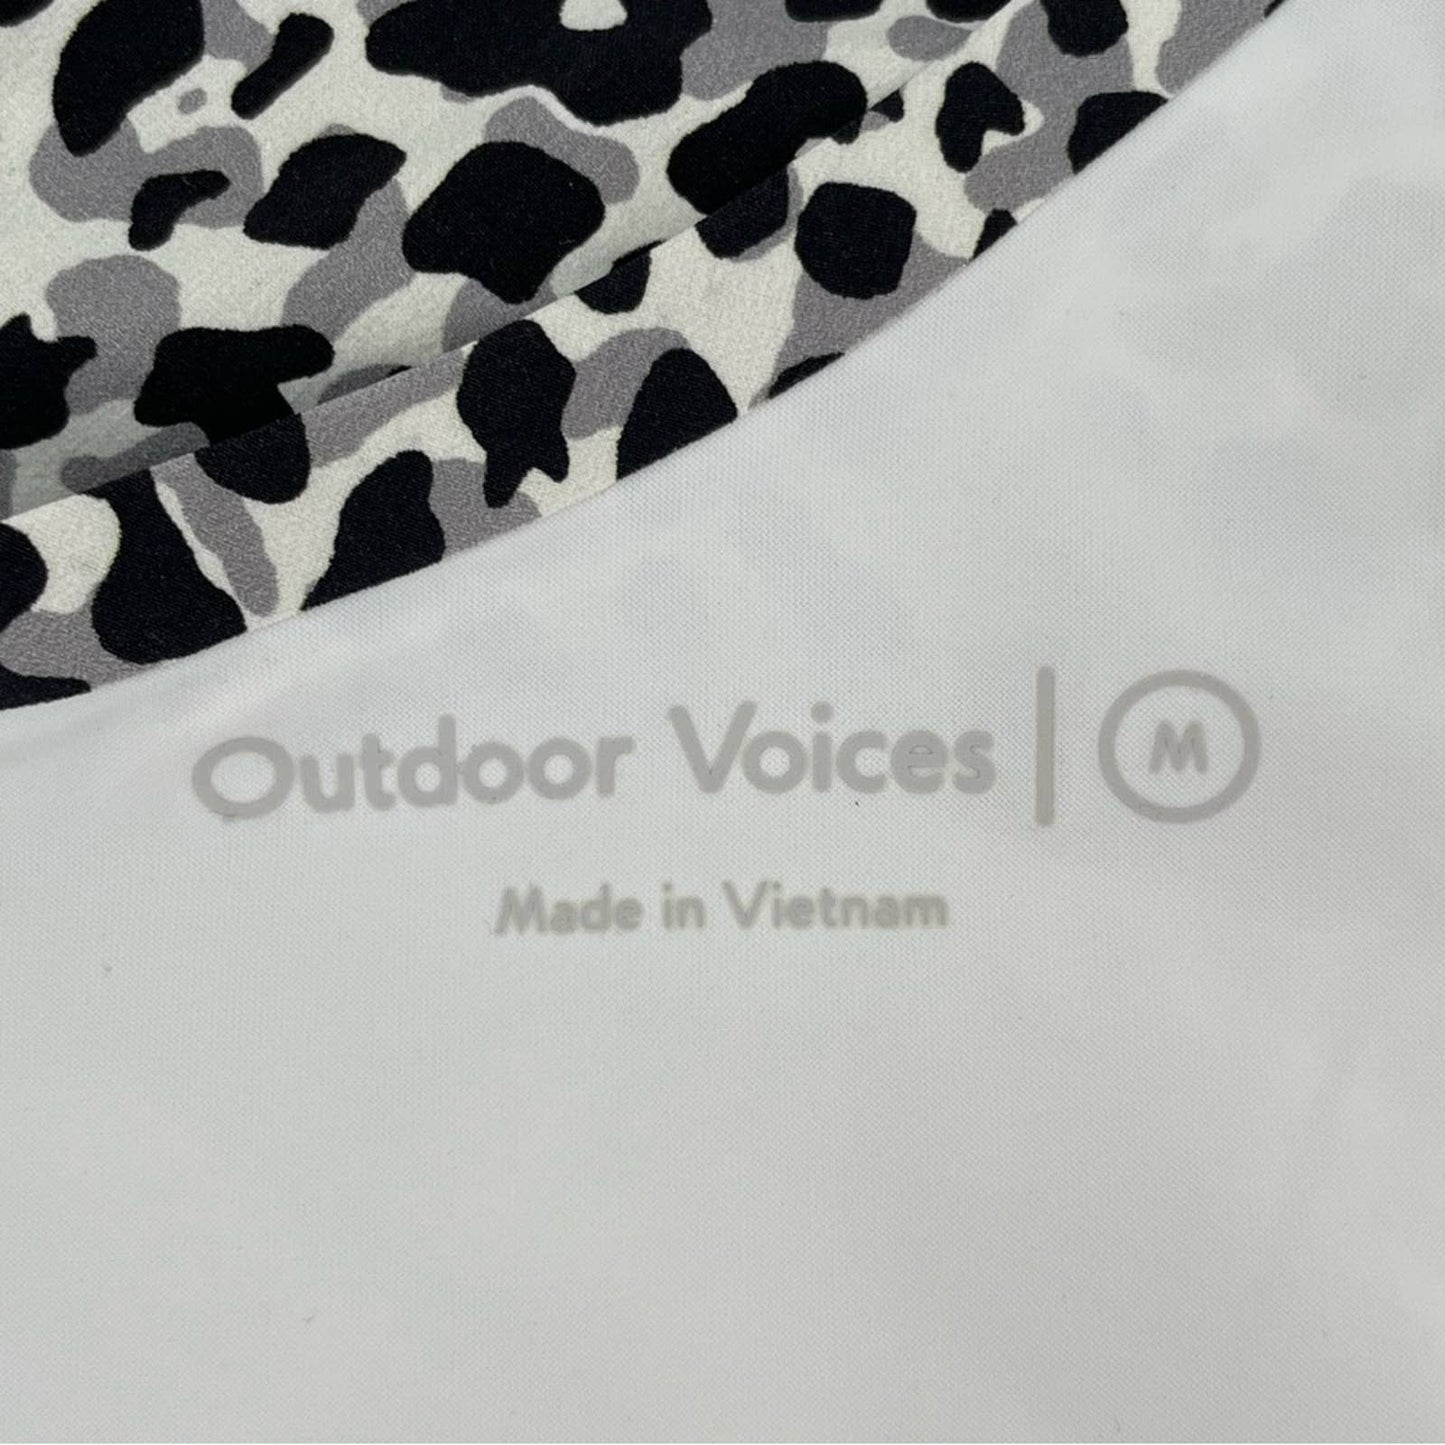 Outdoor Voices The Exercise Dress Snow Leopard Active Athletic Tennis Running Size M